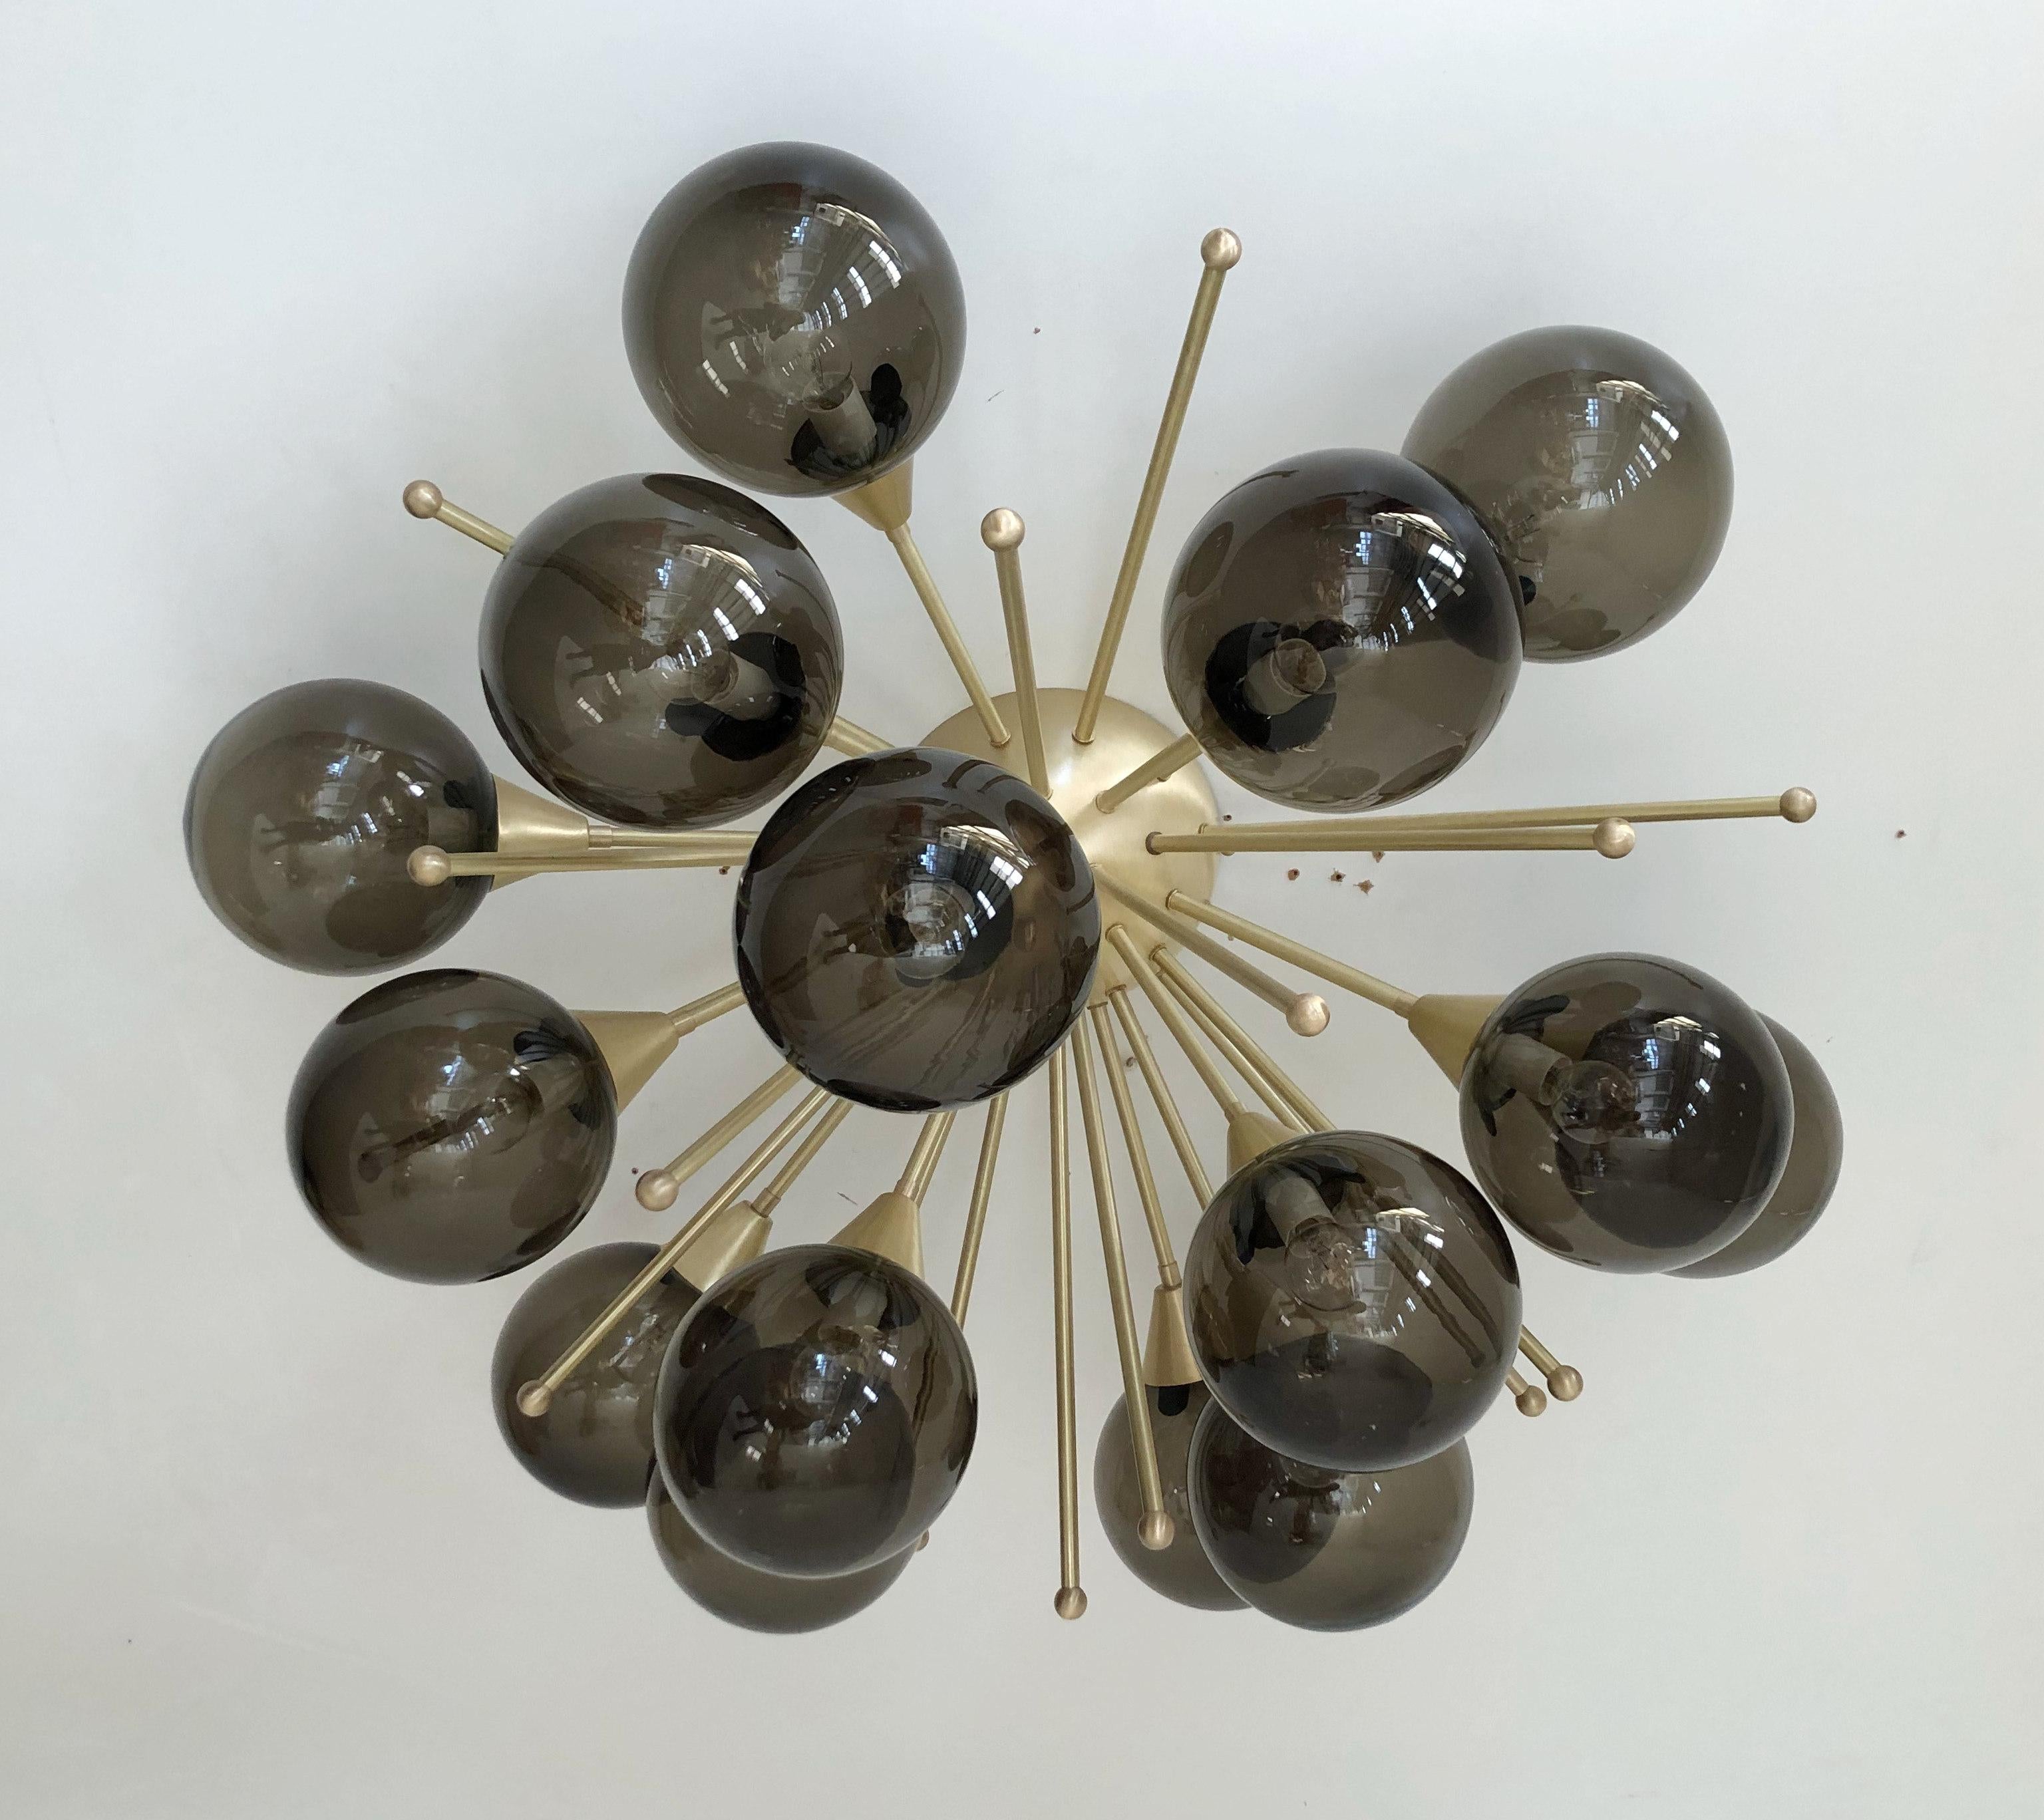 Italian sputnik flush mount with Murano glass globes mounted on solid brass frame
Designed by Fabio Bergomi / Made in Italy
15 lights / E12 or E14 type / max 40W each
Diameter: 35.5 inches / Height: 18 inches
Order Only / This item ships from